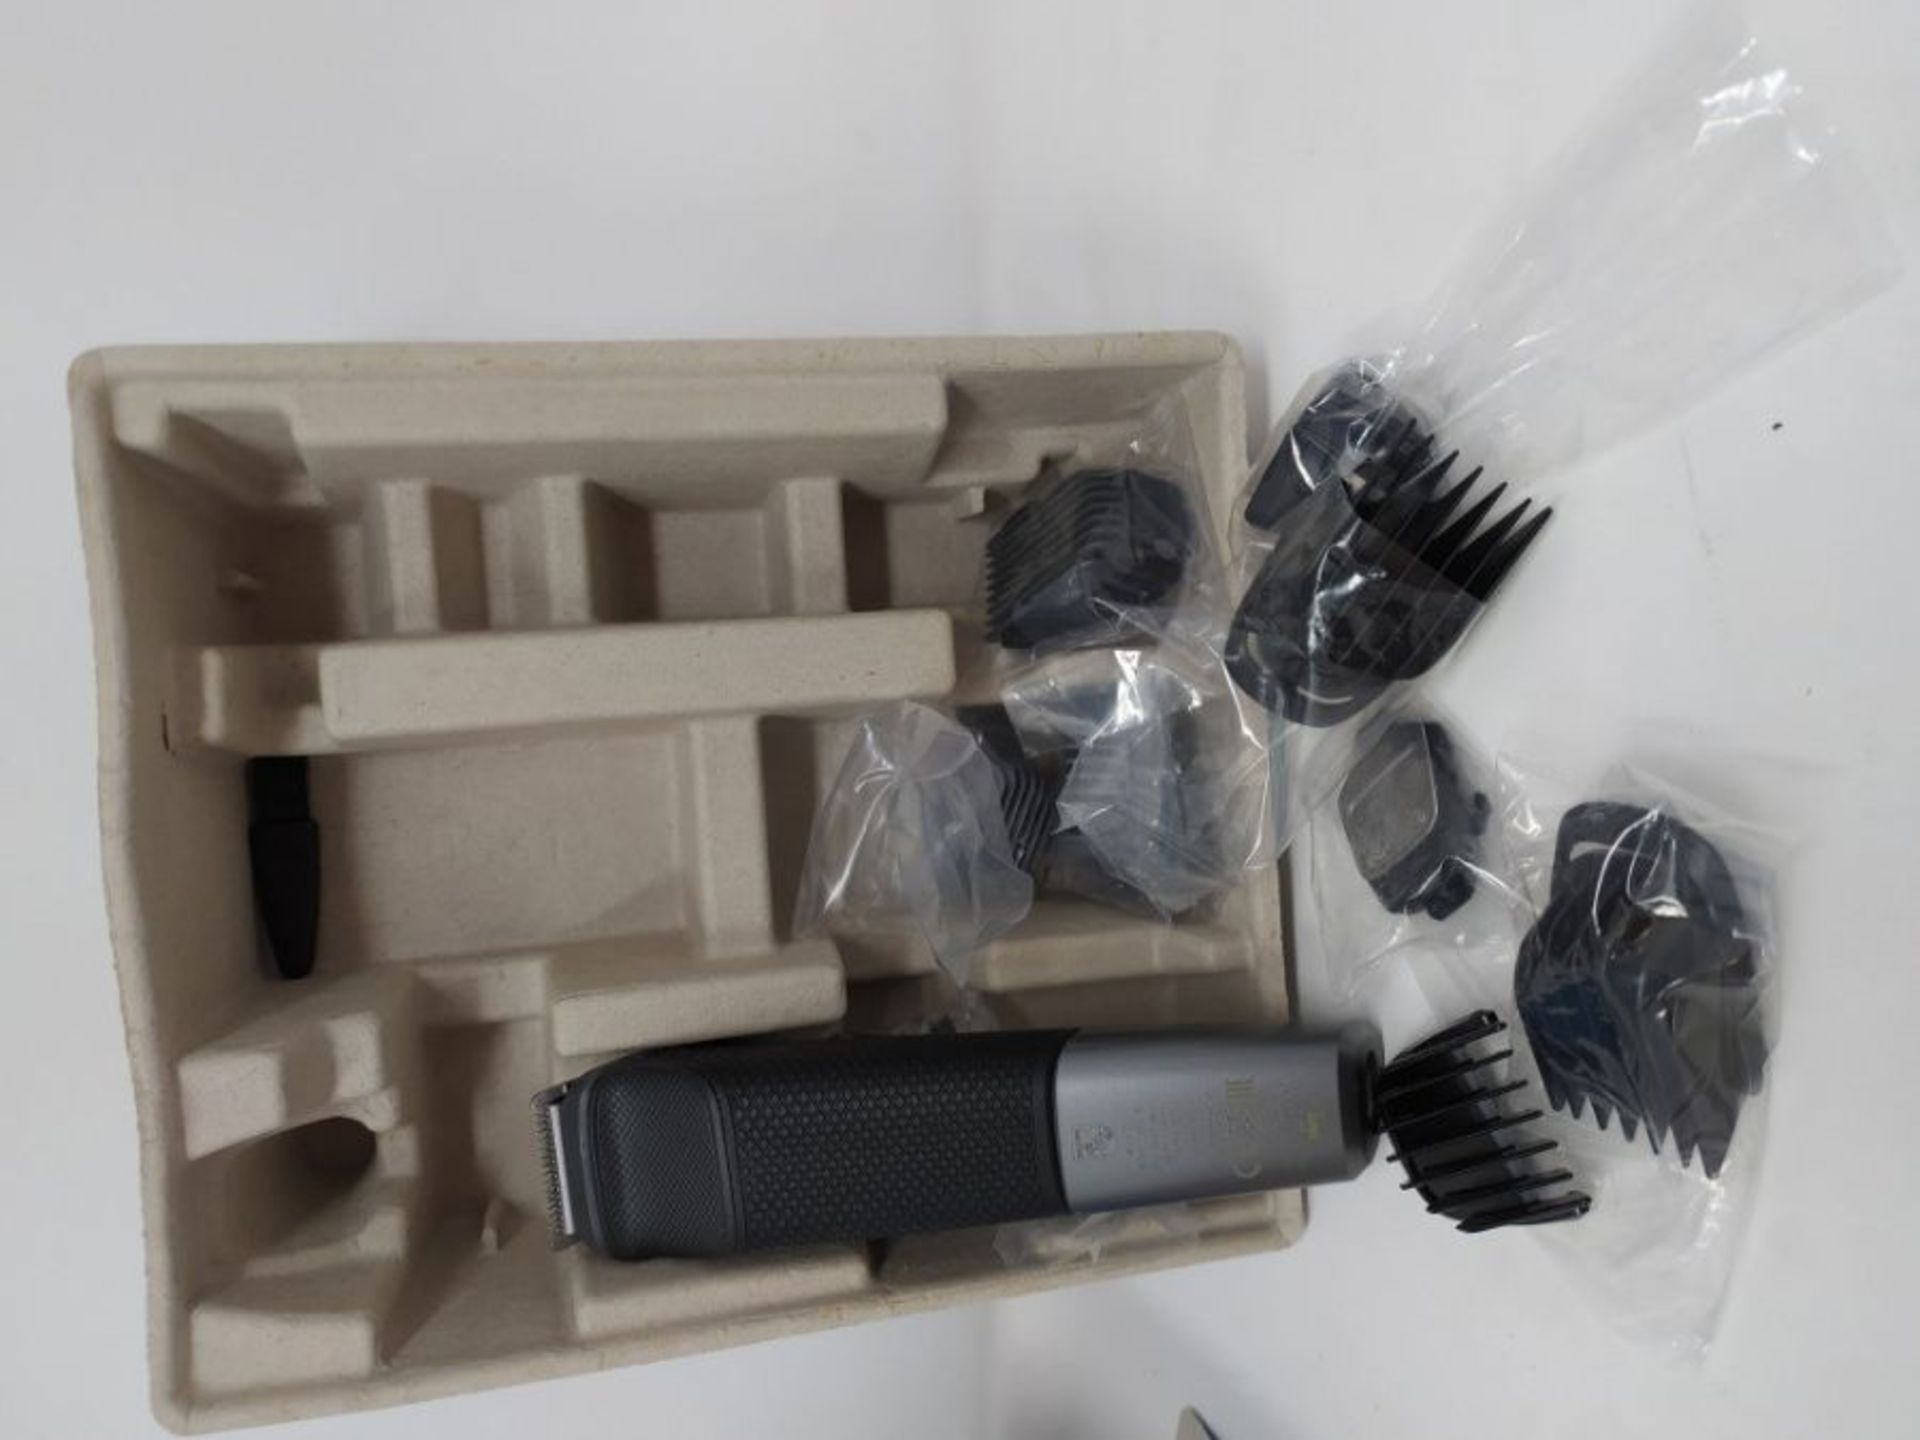 Philips 11-in-1 All-In-One Trimmer, Series 5000 Grooming Kit, Beard Trimmer, Hair Clip - Image 2 of 2